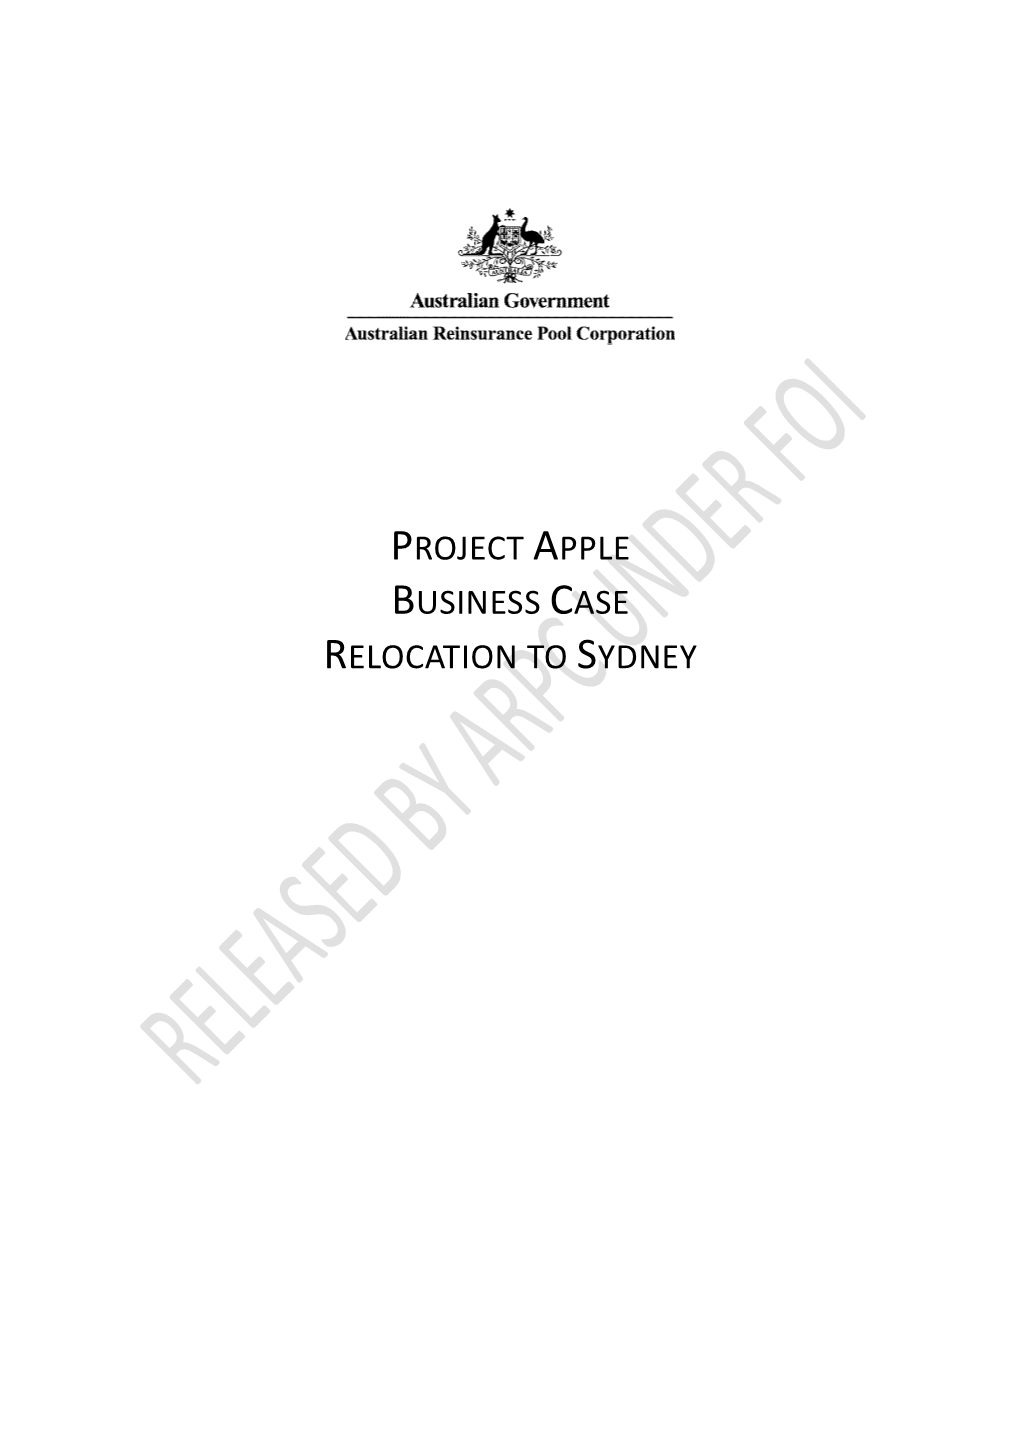 Project Apple Business Case Relocation to Sydney